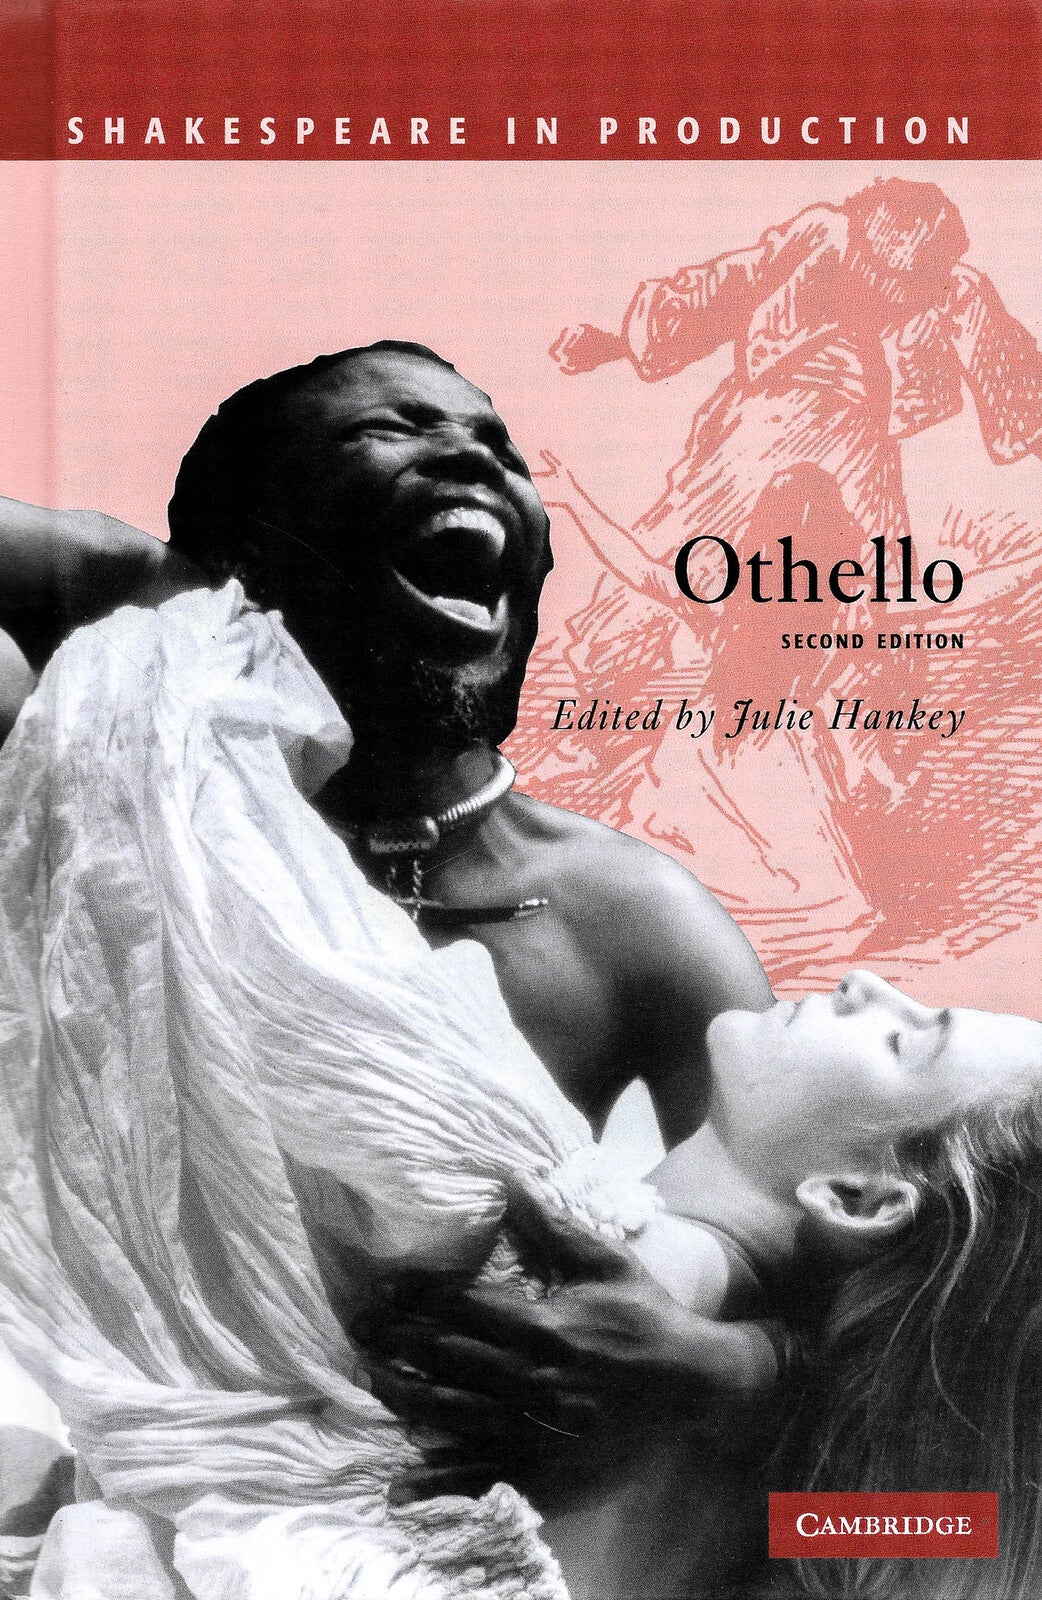 Othello -Shakespeare in Production - Performing Arts Book